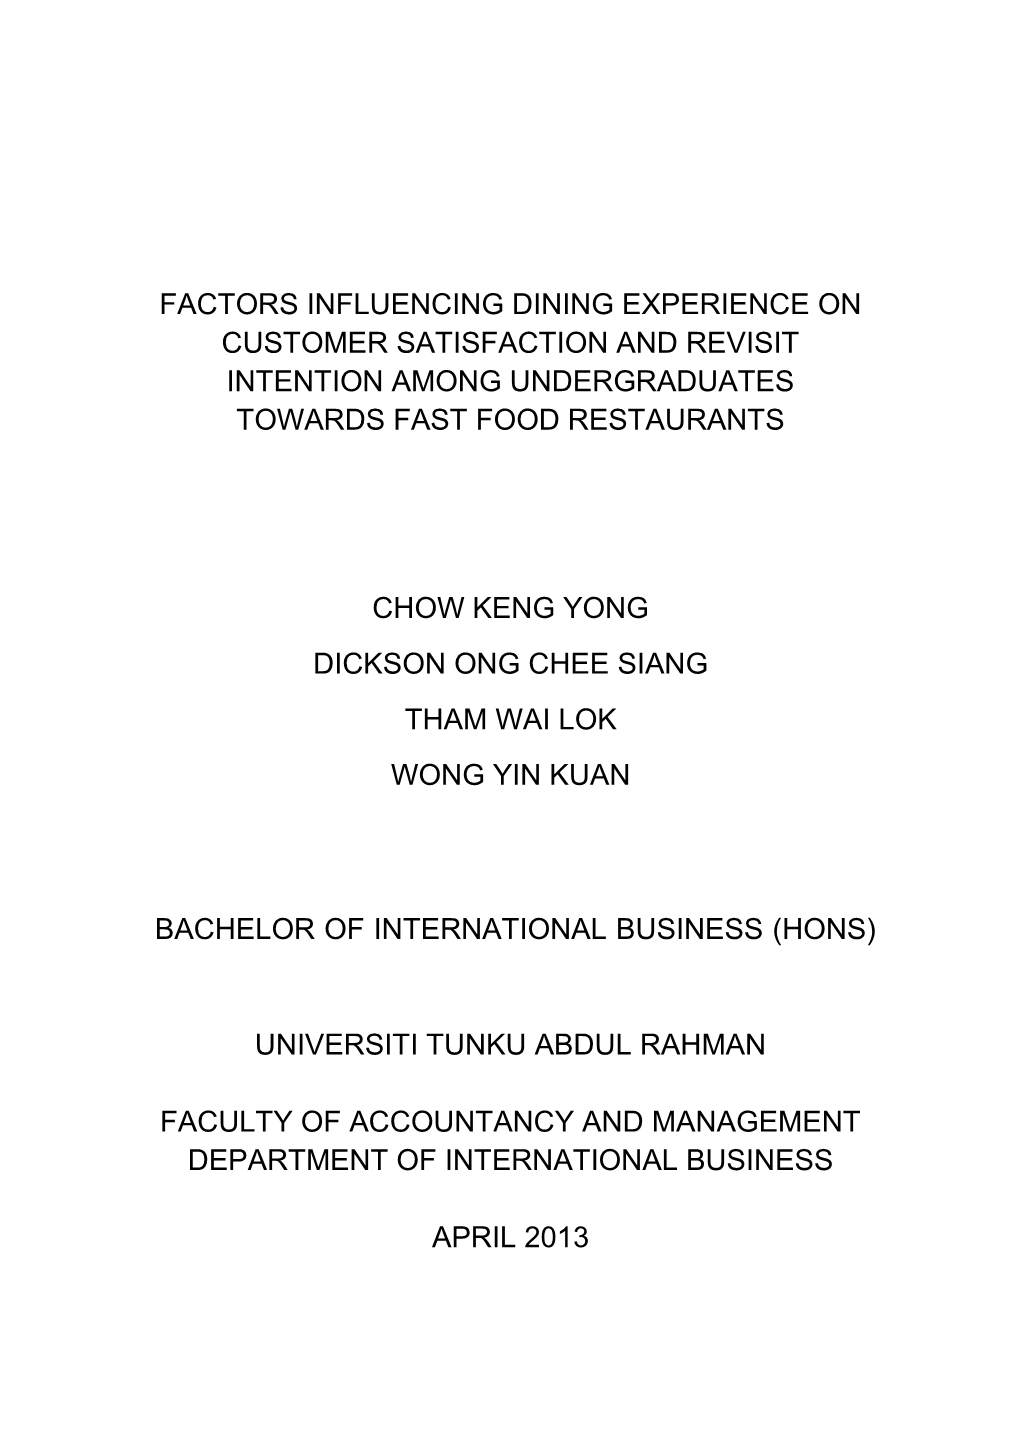 Factors Influencing Dining Experience on Customer Satisfaction and Revisit Intention Among Undergraduates Towards Fast Food Restaurants